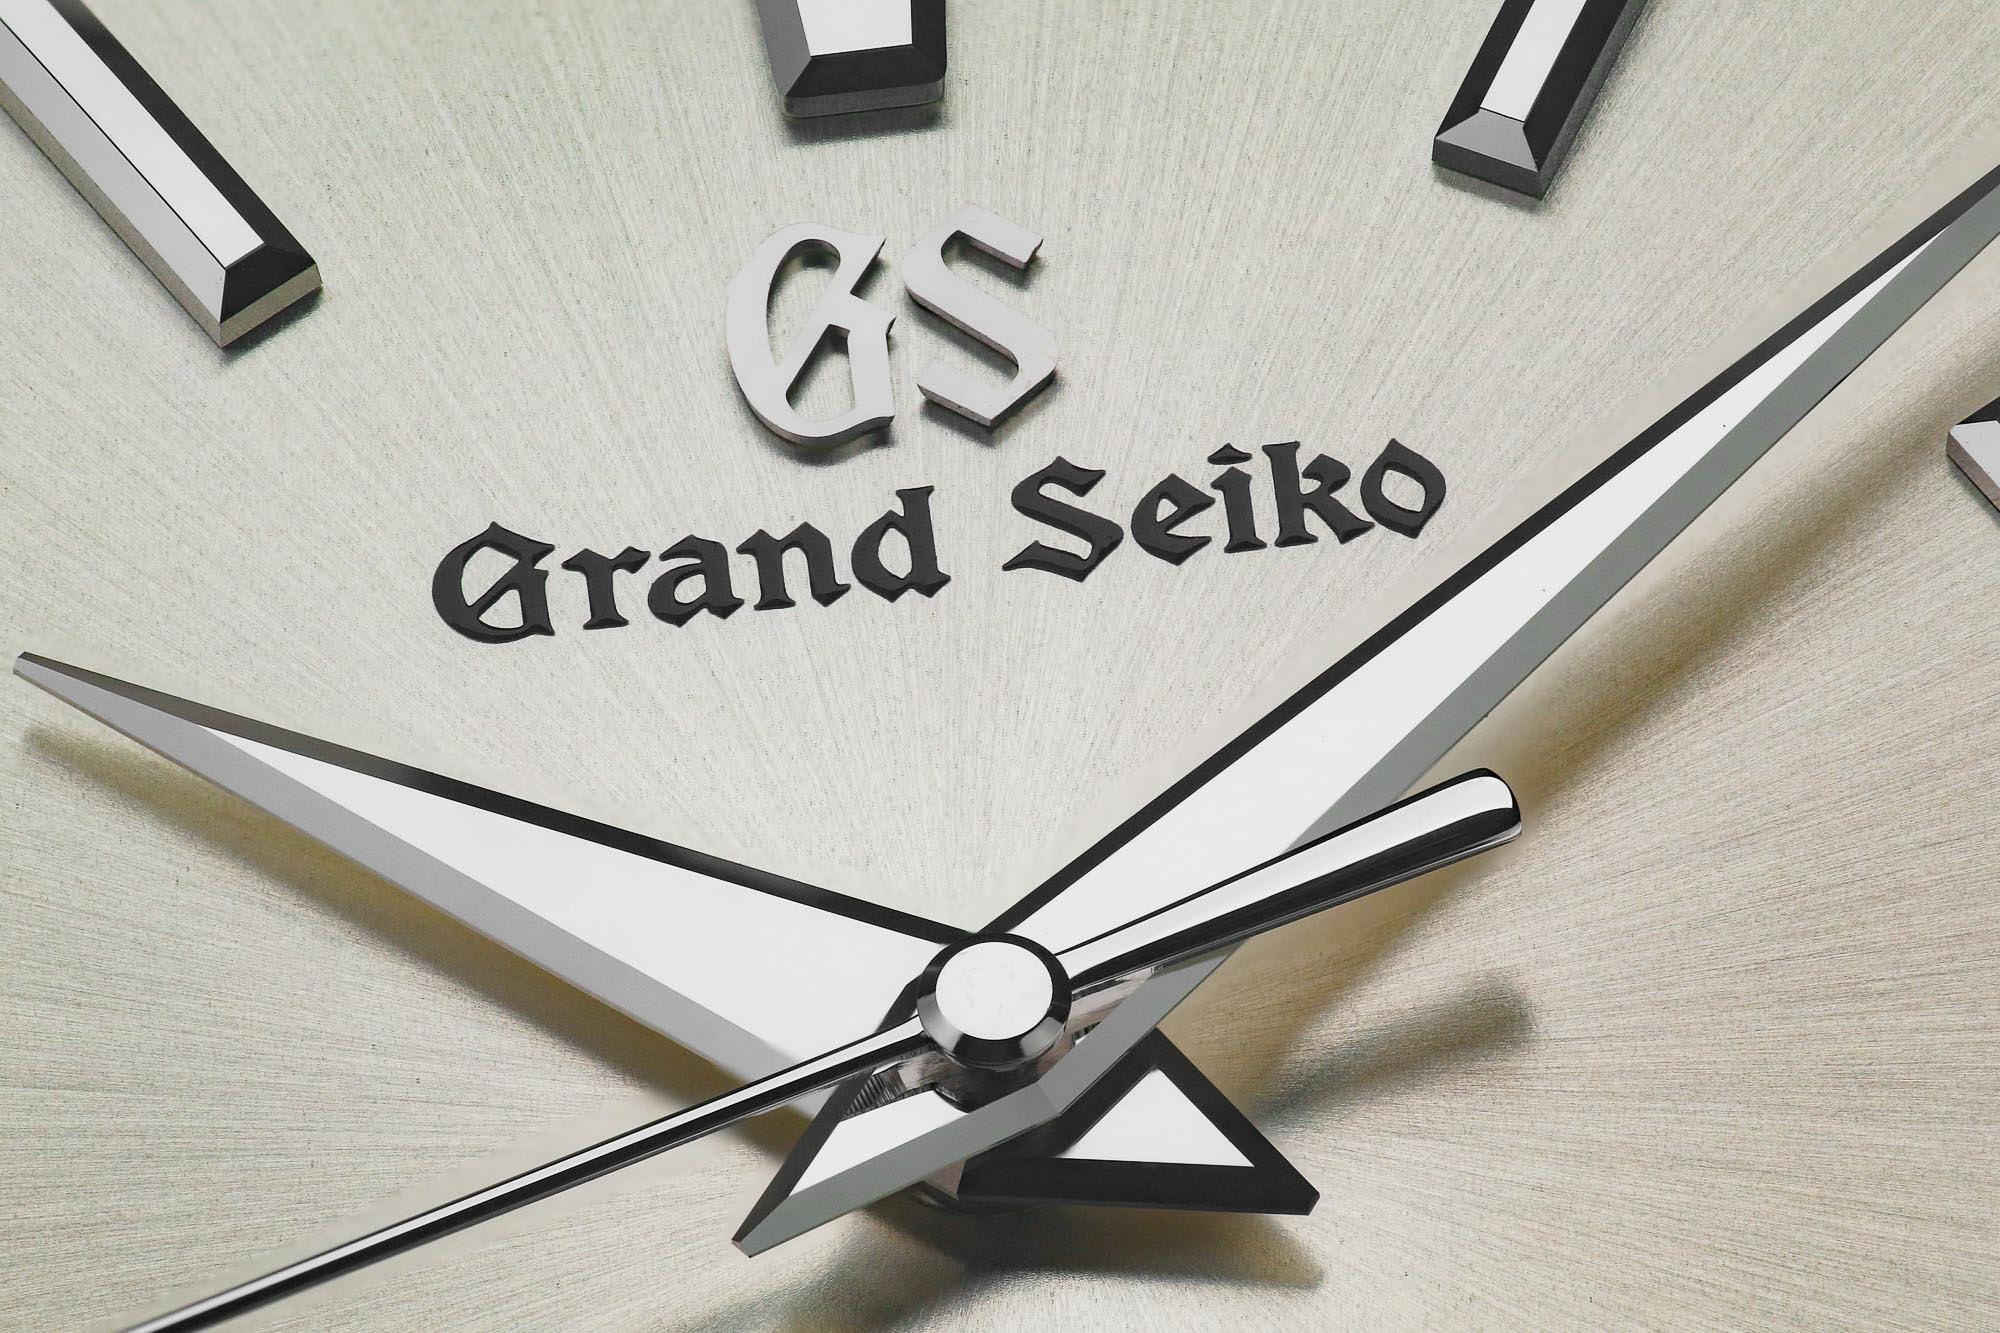 Macro detail of Grand Seiko SBGP009 showing hands, indexes, and logo.